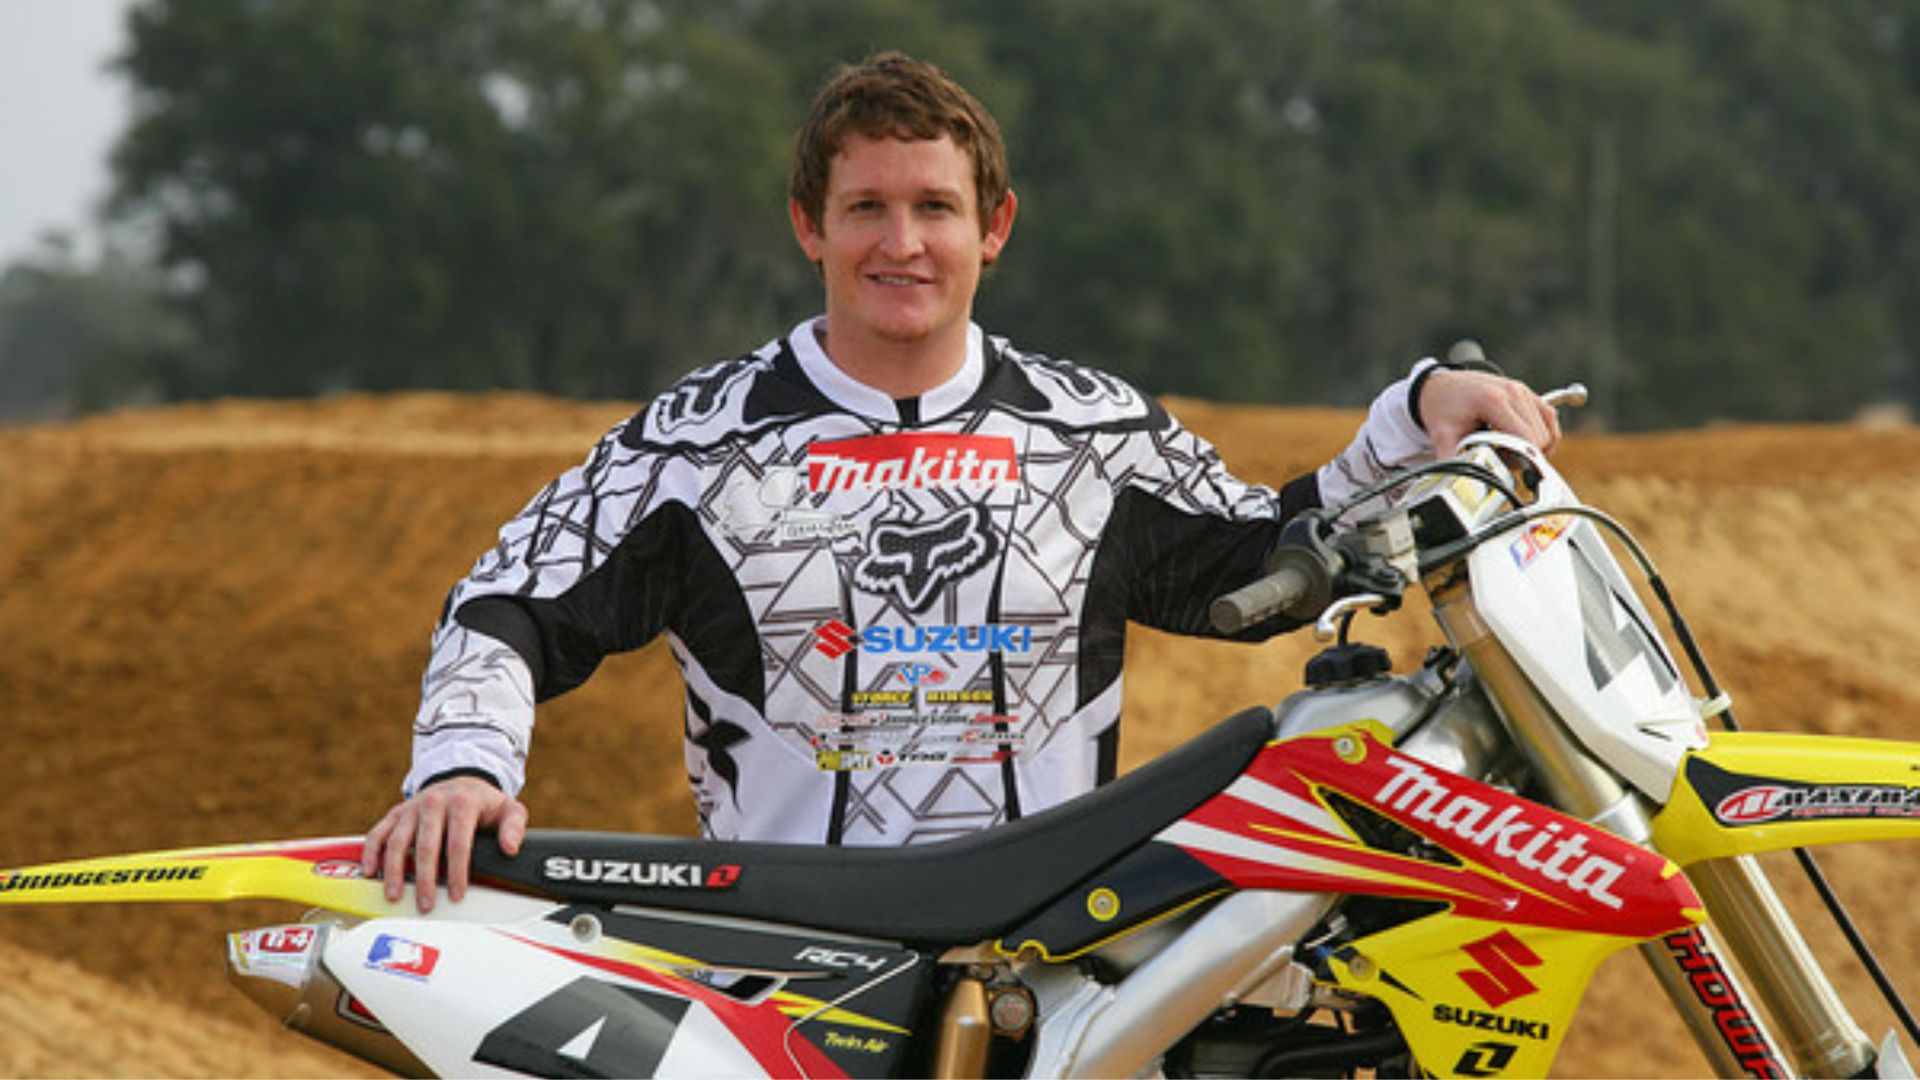  Ricky Carmichael With His Dirt Bike